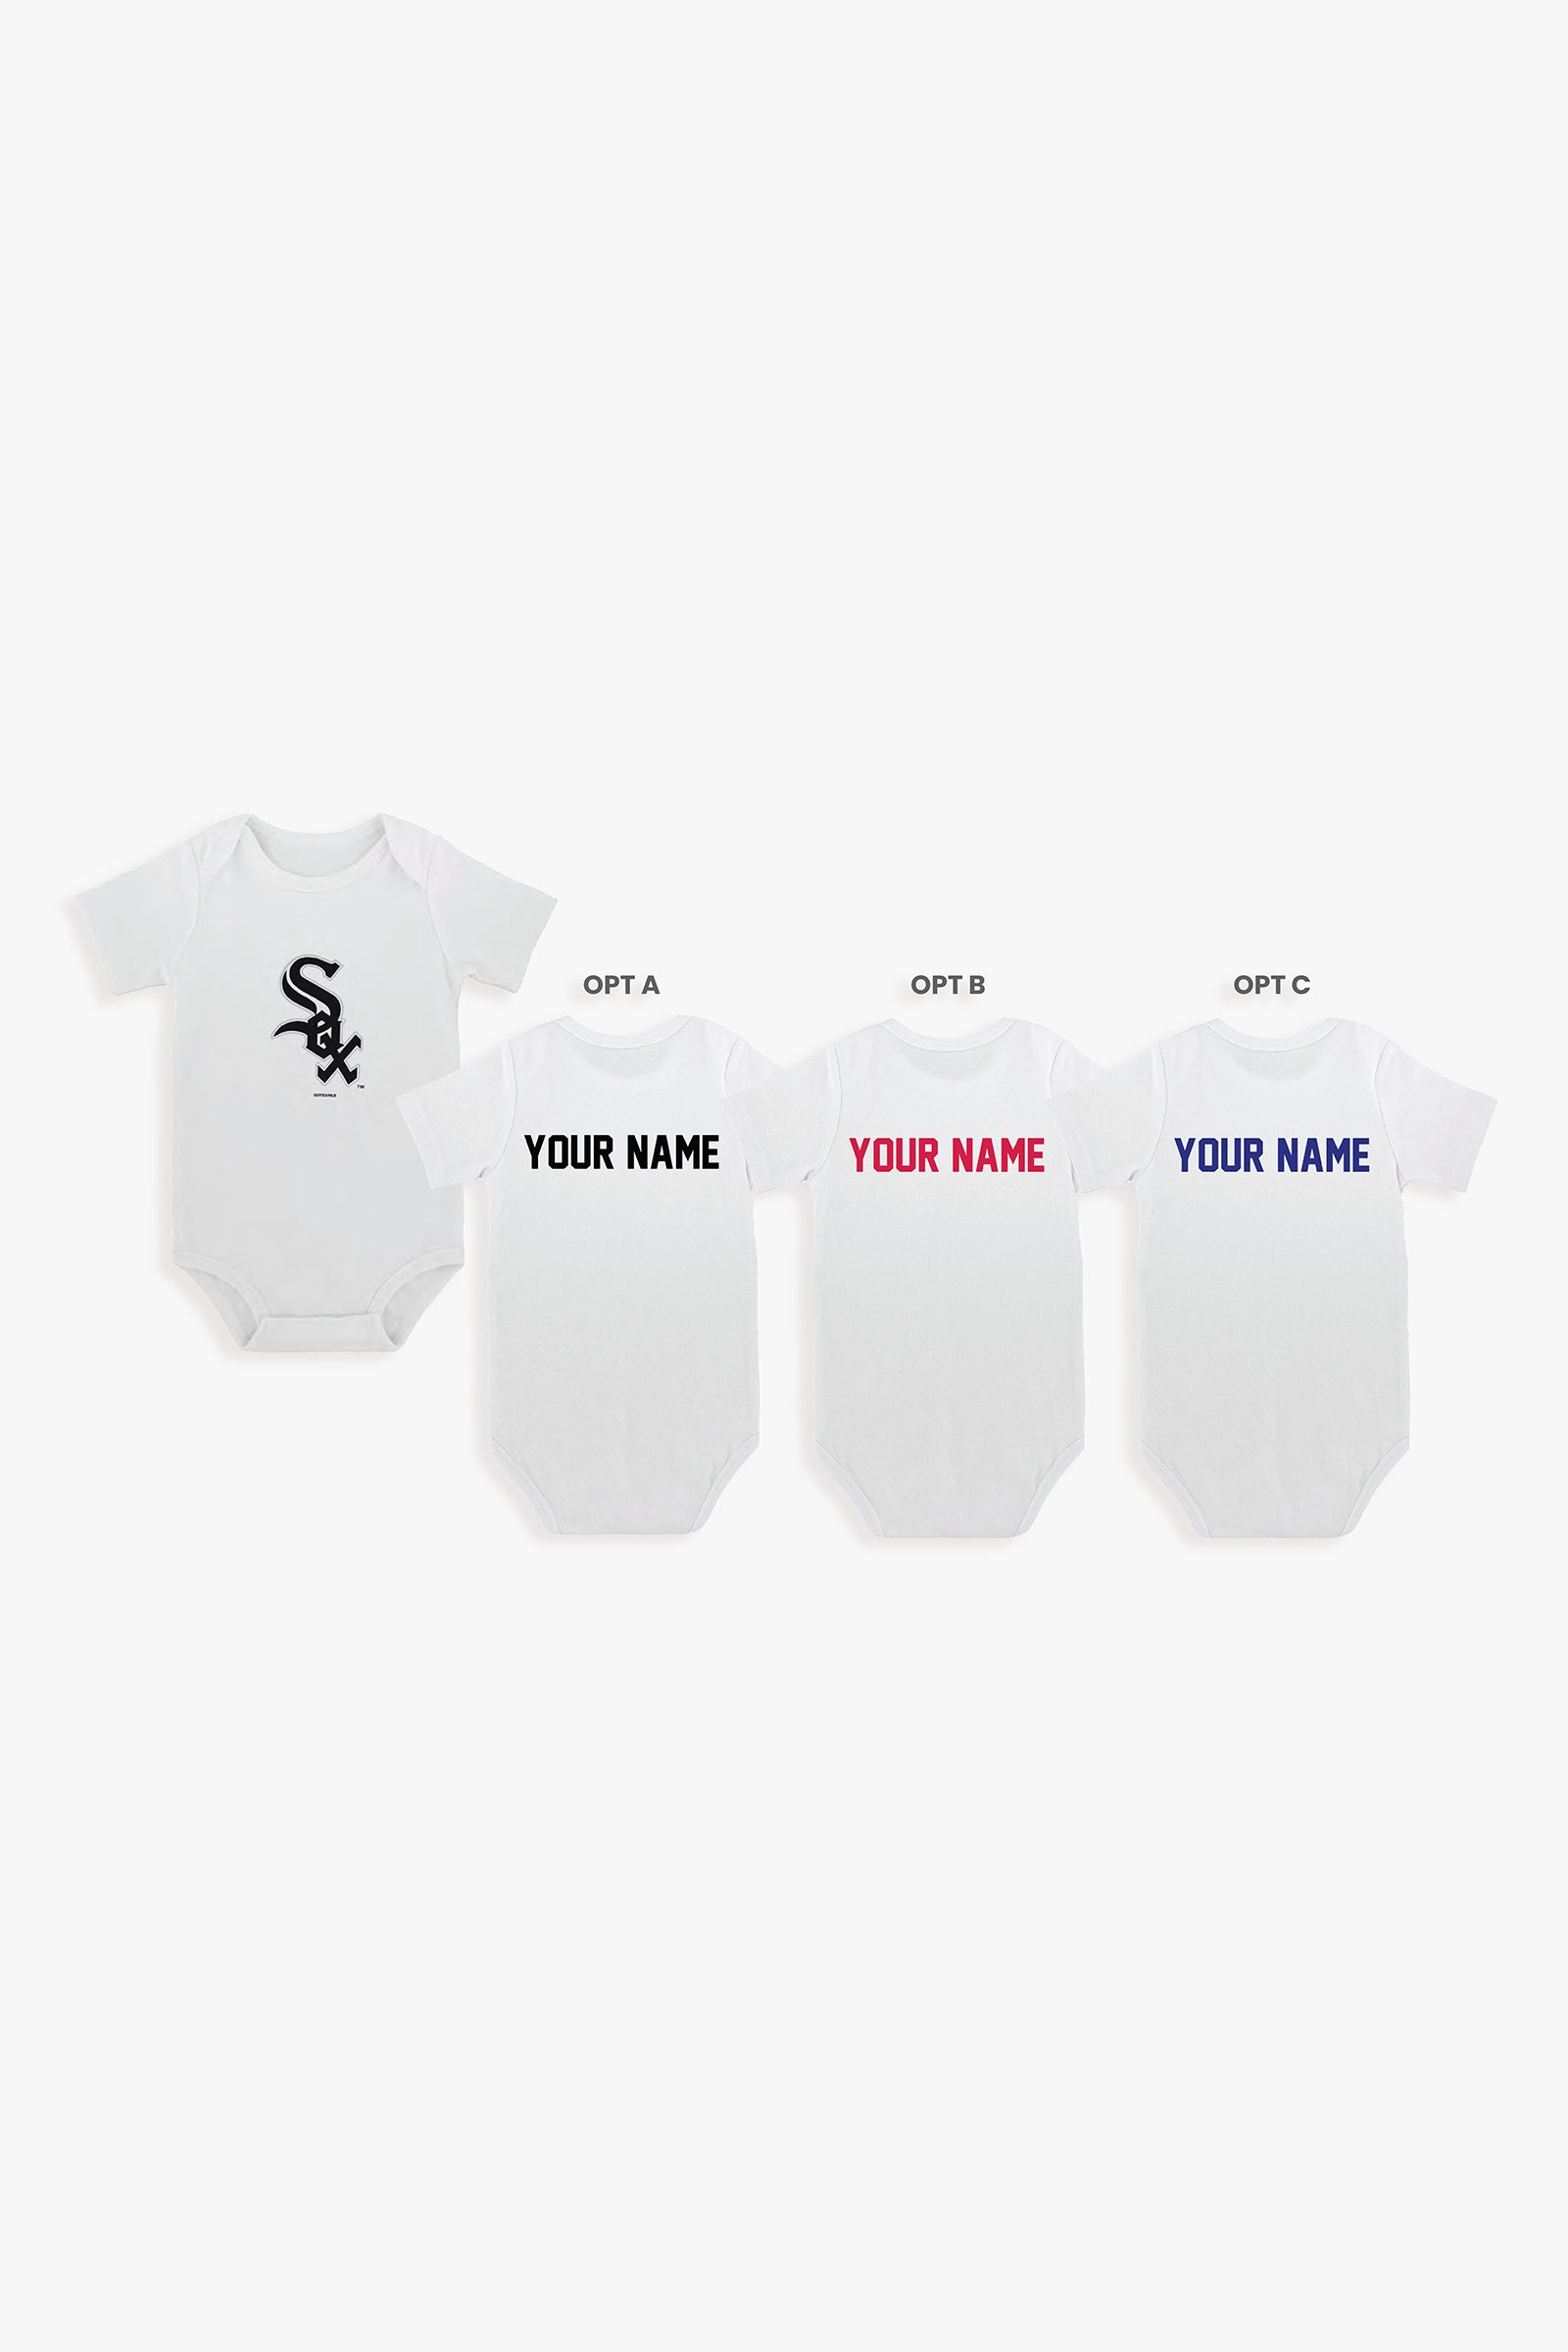 Chicago Cubs Infant Baby 3 Piece Body Suit Set Lil' Jersey White 3 P